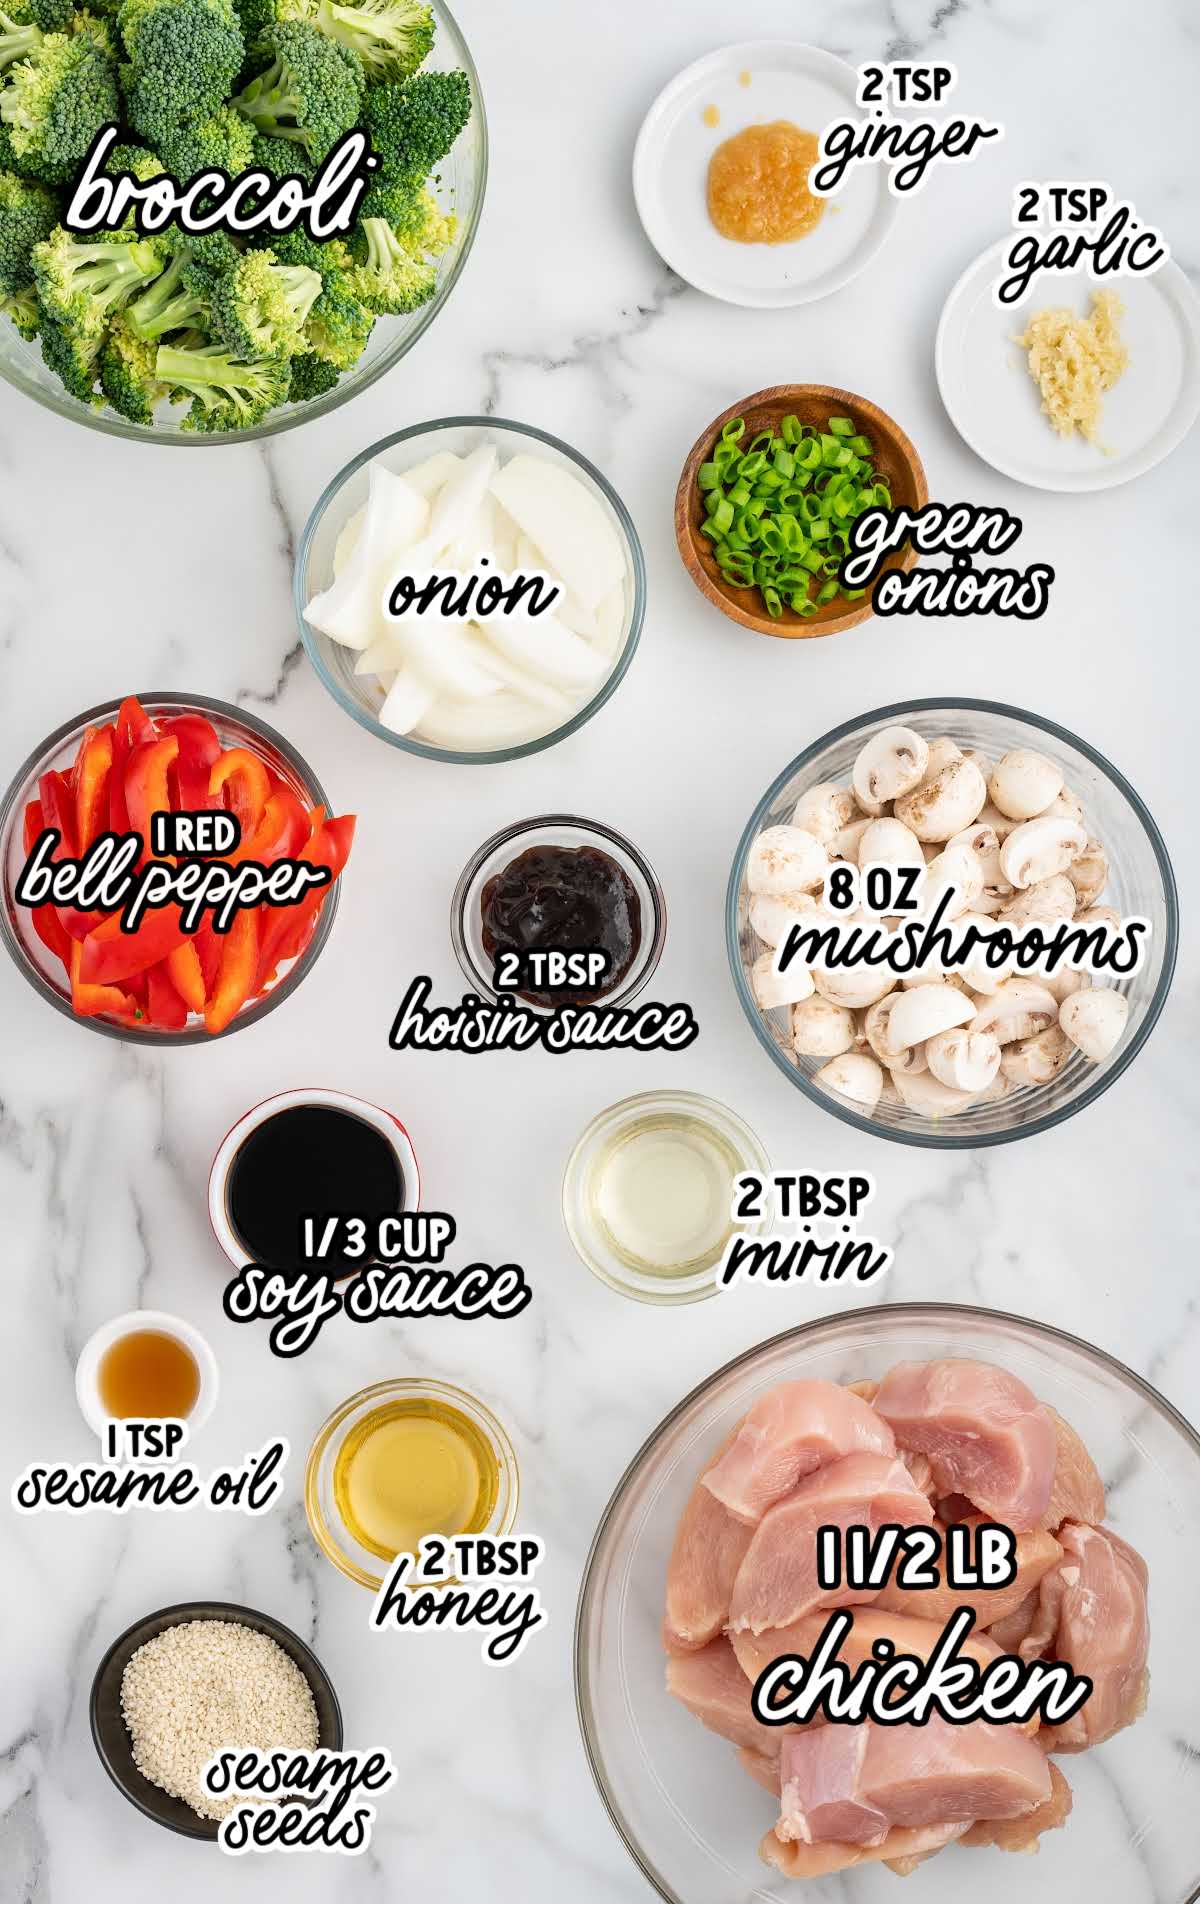 Sheet Pan Chicken raw ingredients that are labeled